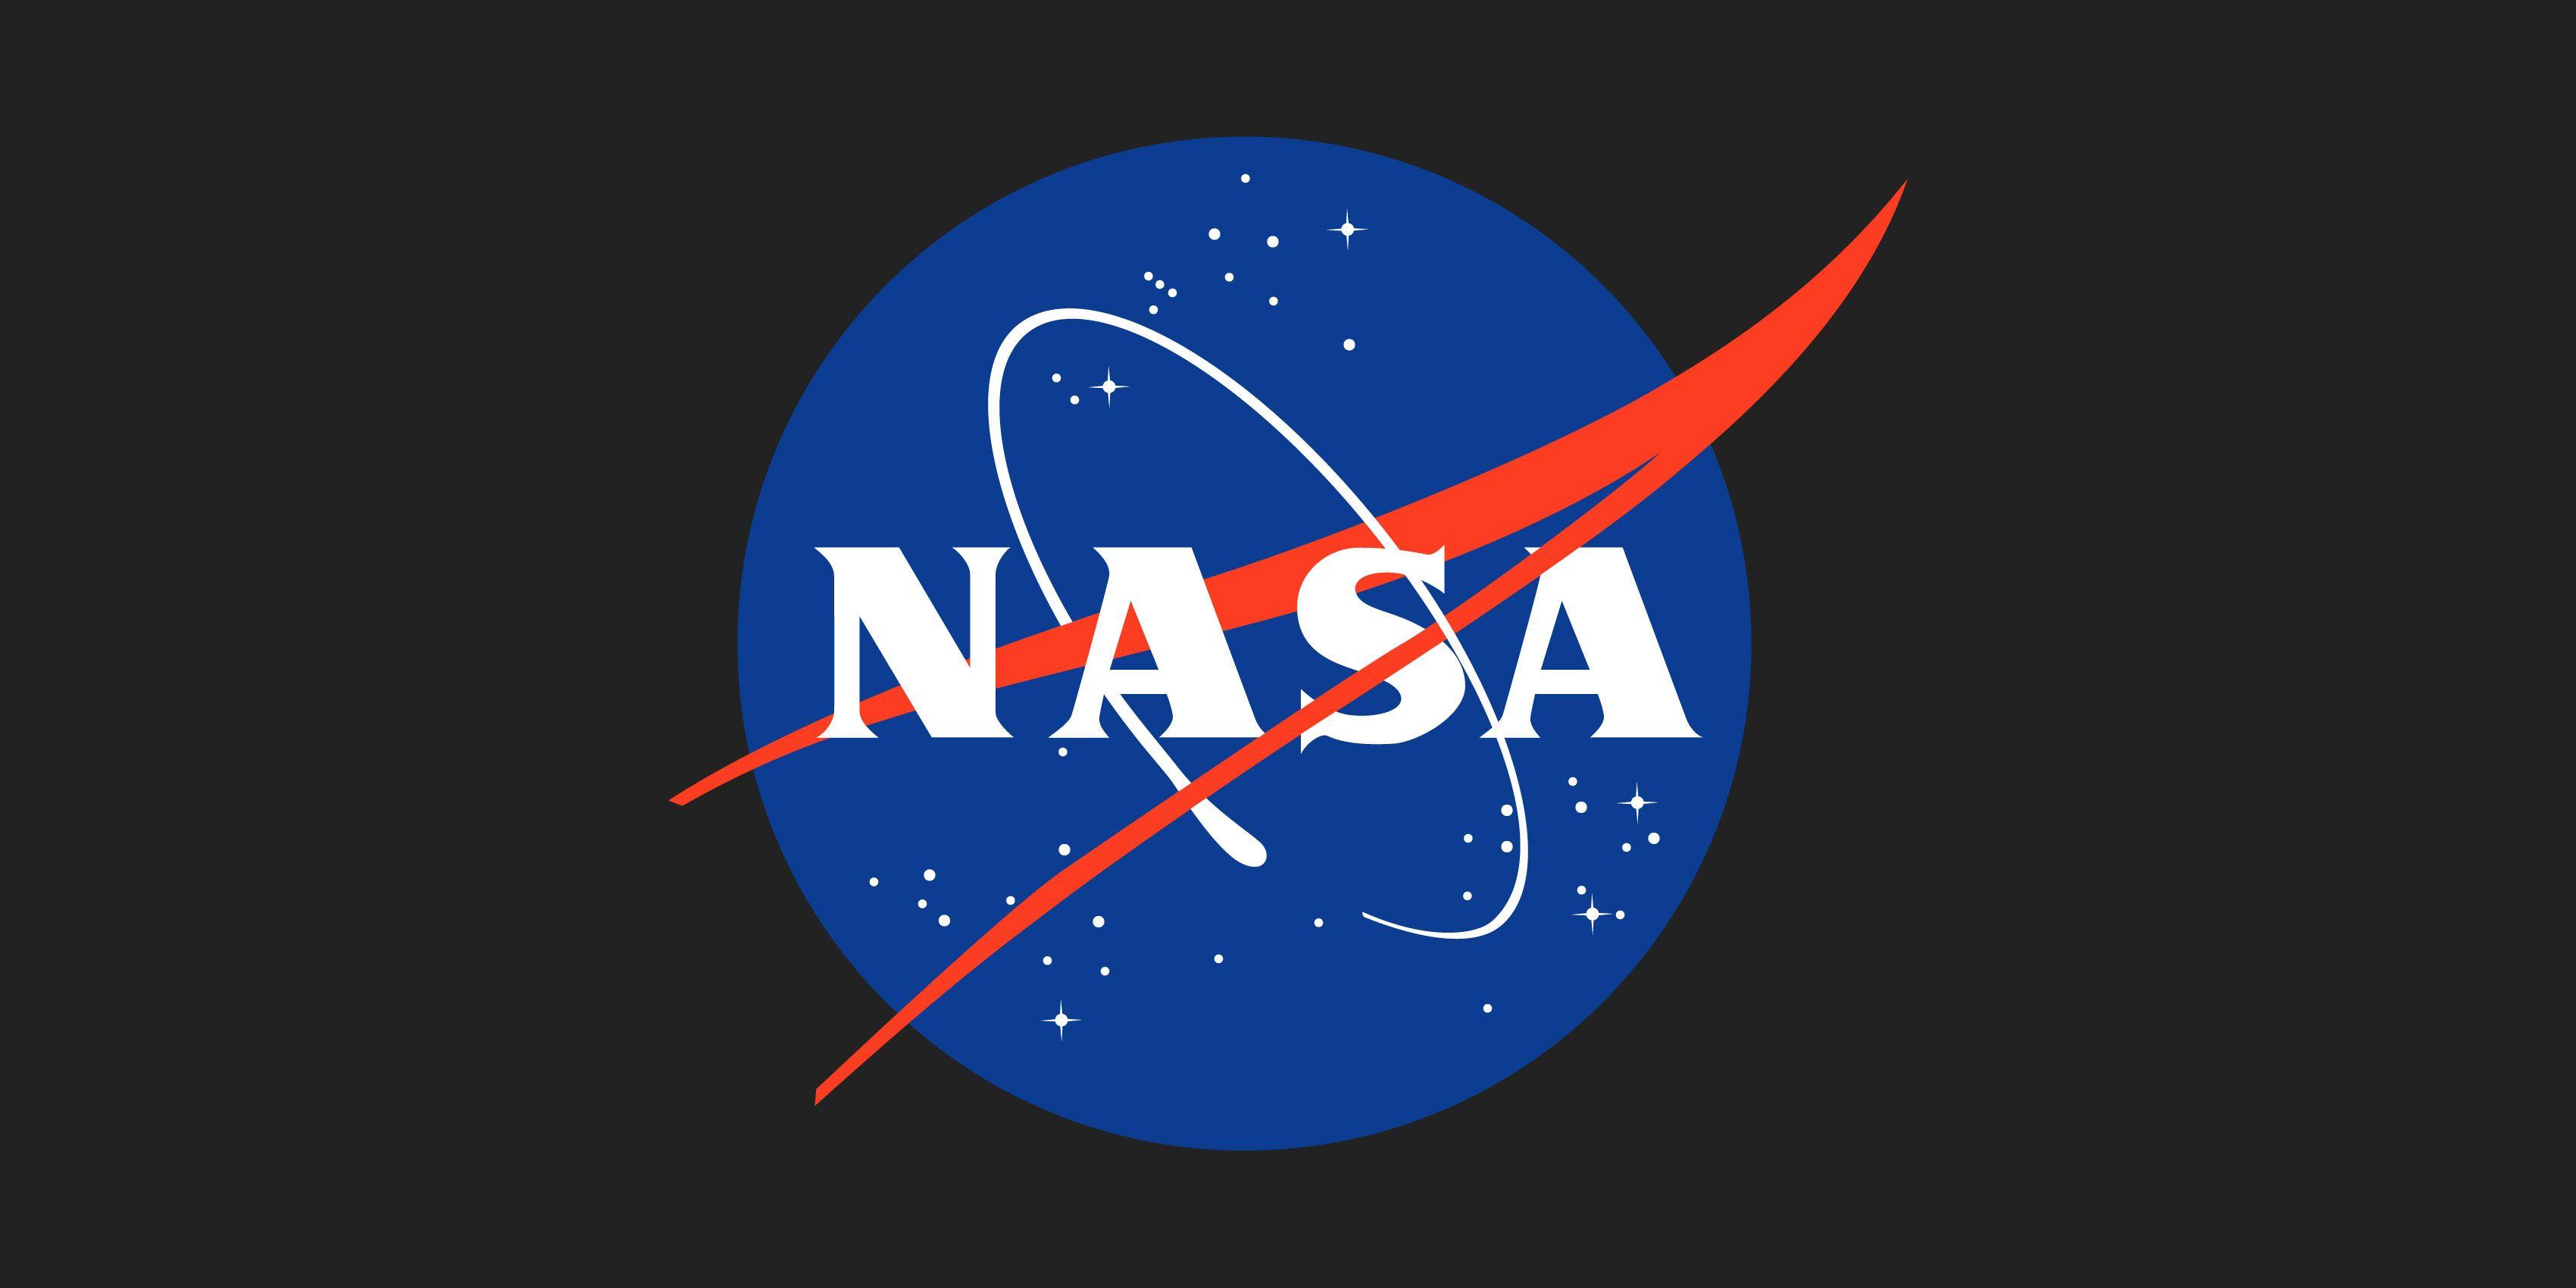 NASA awards contract for continued operations of its Jet Propulsion